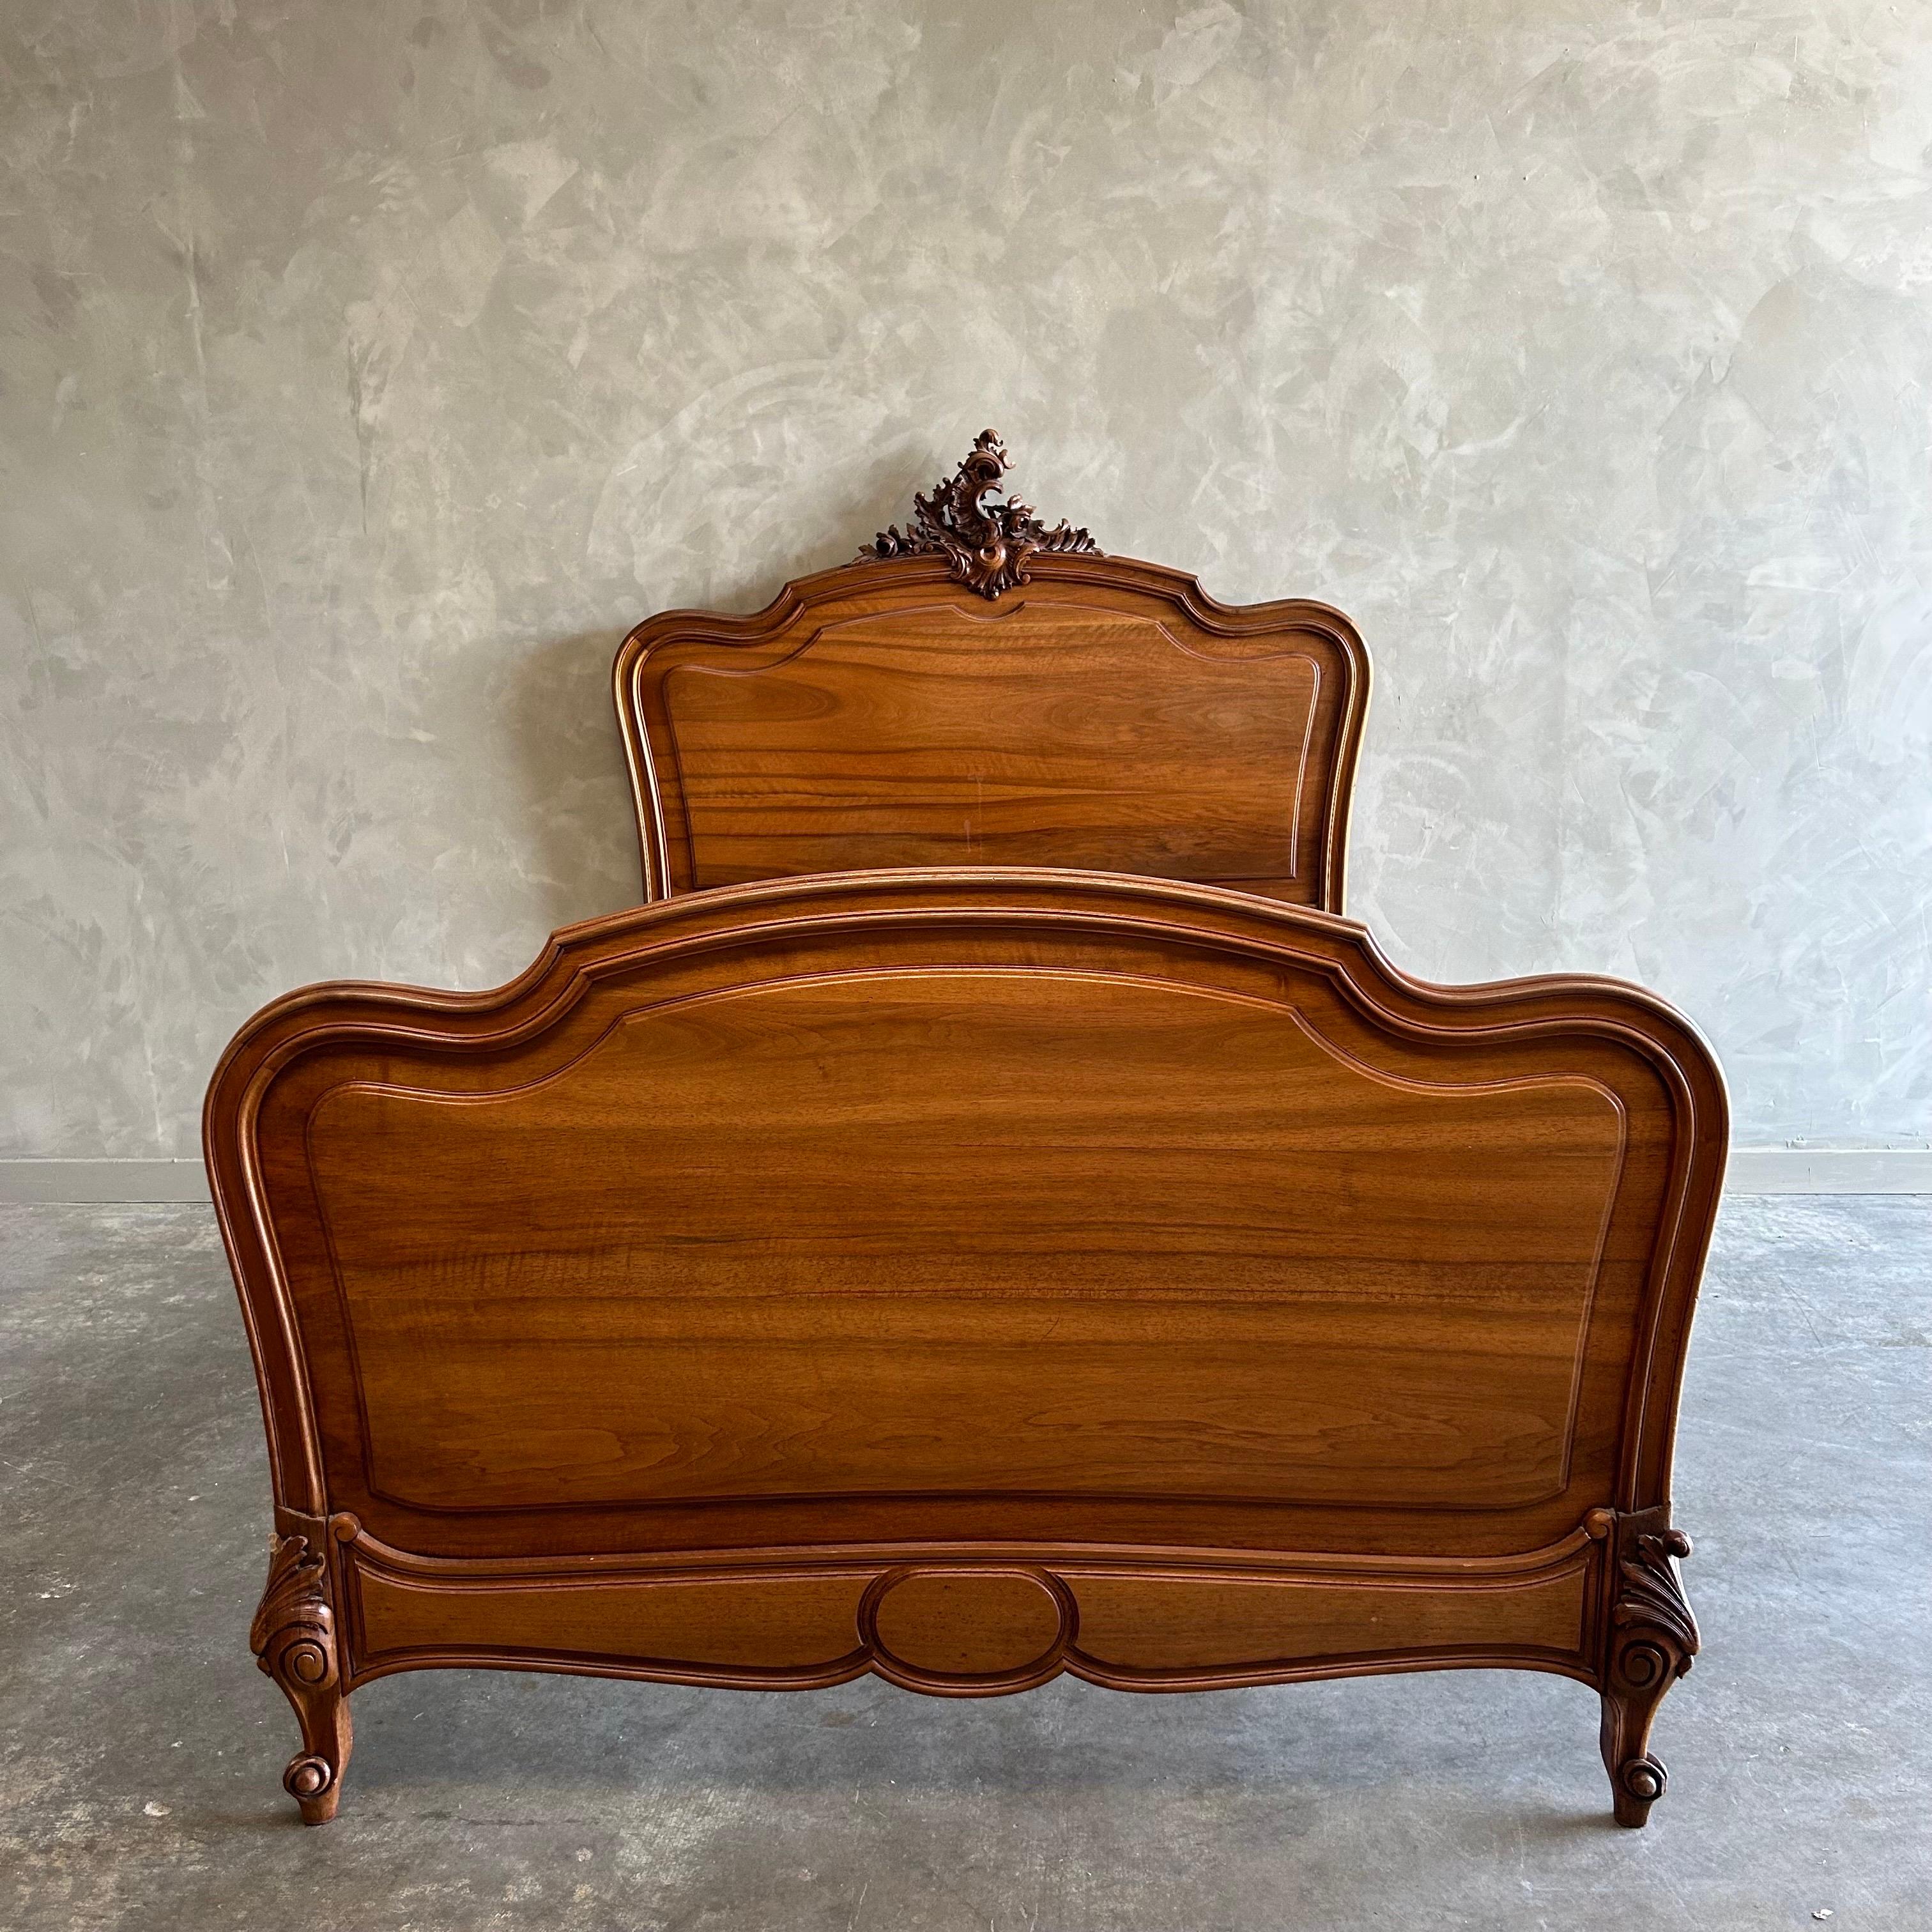 Antique Walnut Carved Full size French bed 
Headboard, footboard with metal rails. (original rails not available)
Overall size: 58”w x 81”d x 61”h
Footboard: 39”h. 
Inside dimensions : 54”w x 76”d (US full size mattress)